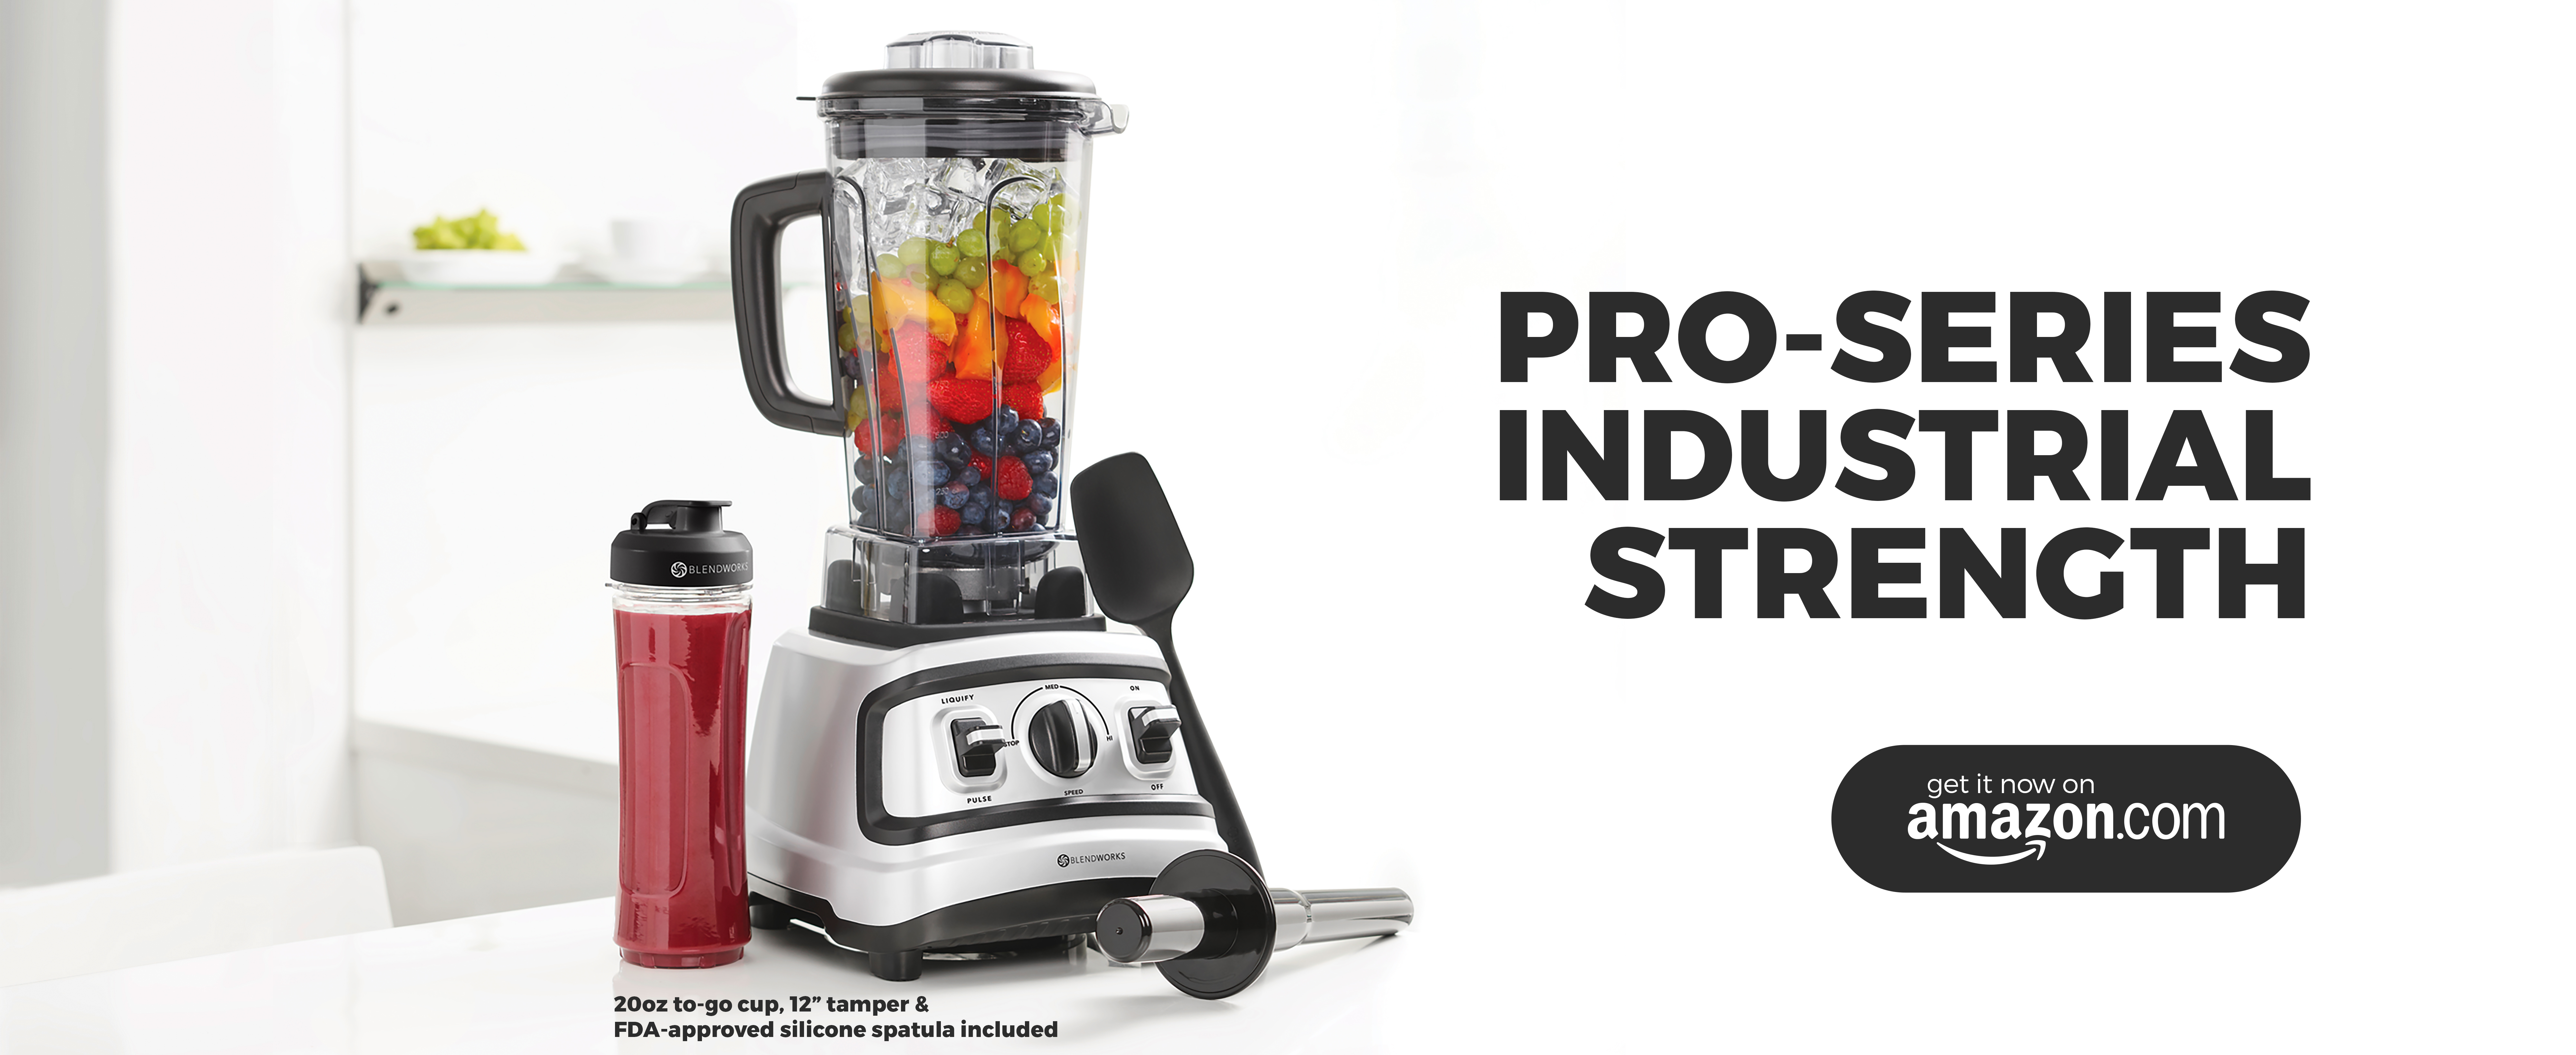 pro-series industrial strength